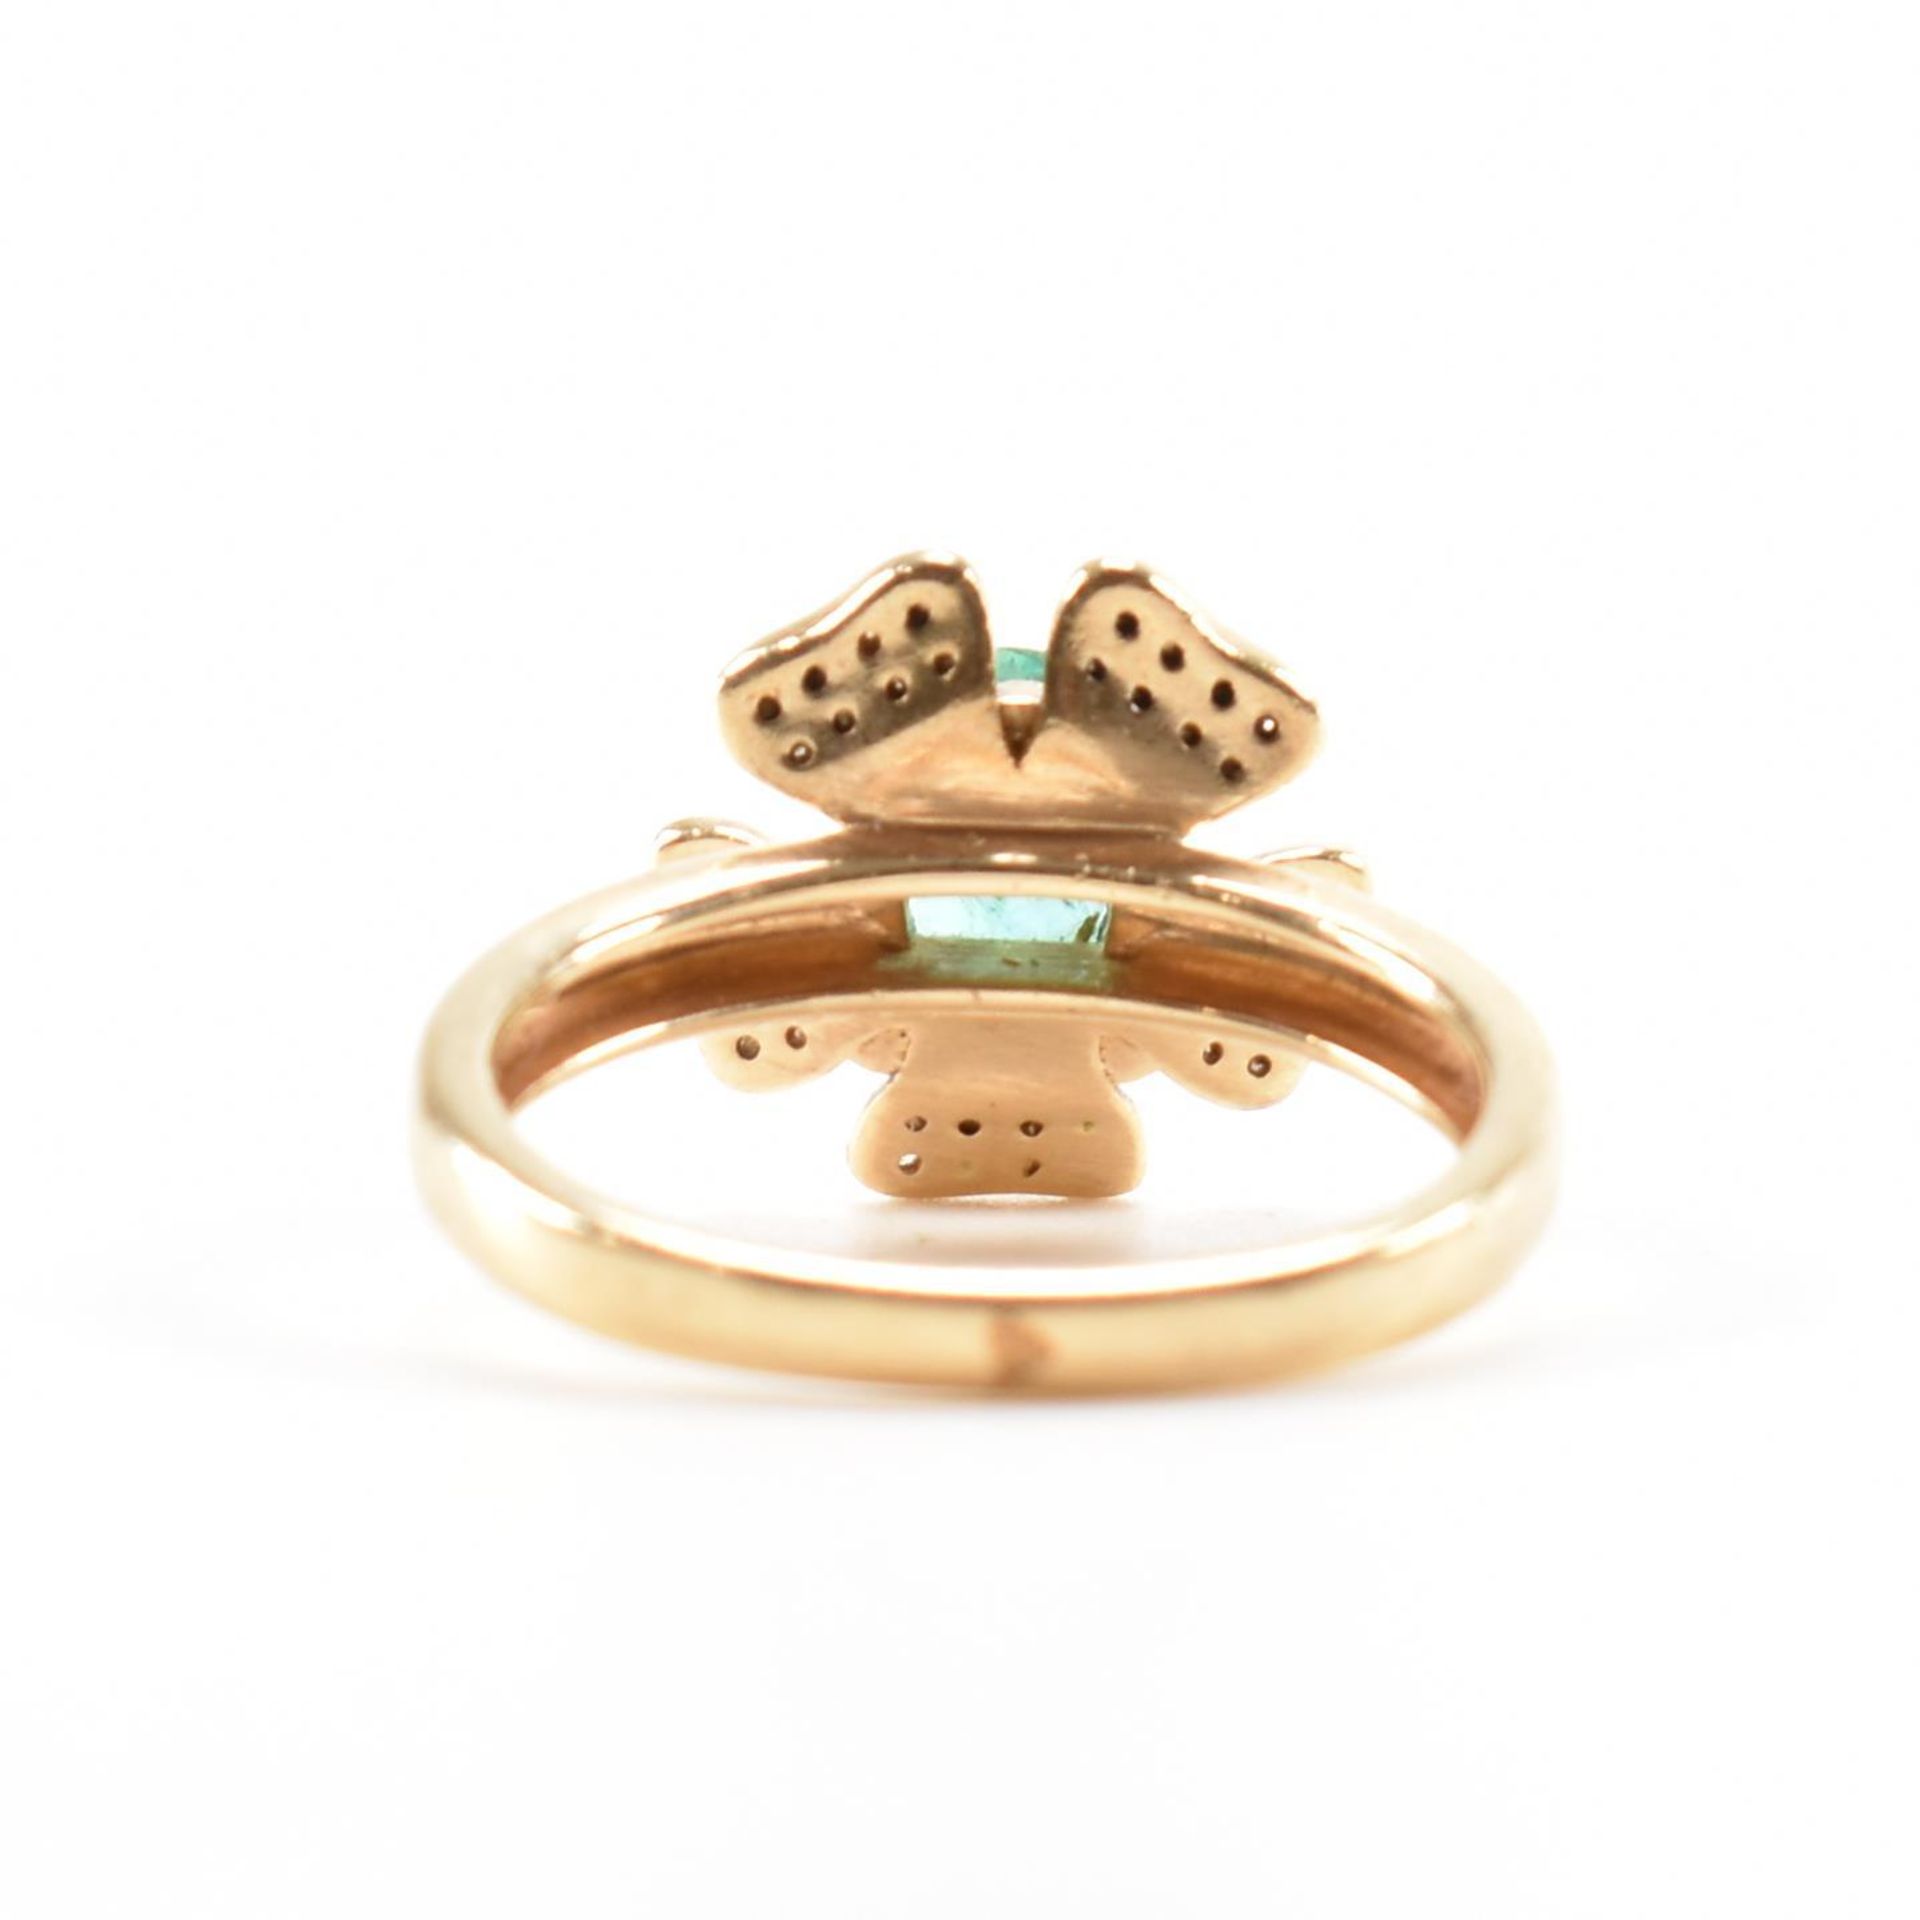 GOLD EMERALD & DIAMOND CLUSTER RING - Image 3 of 7